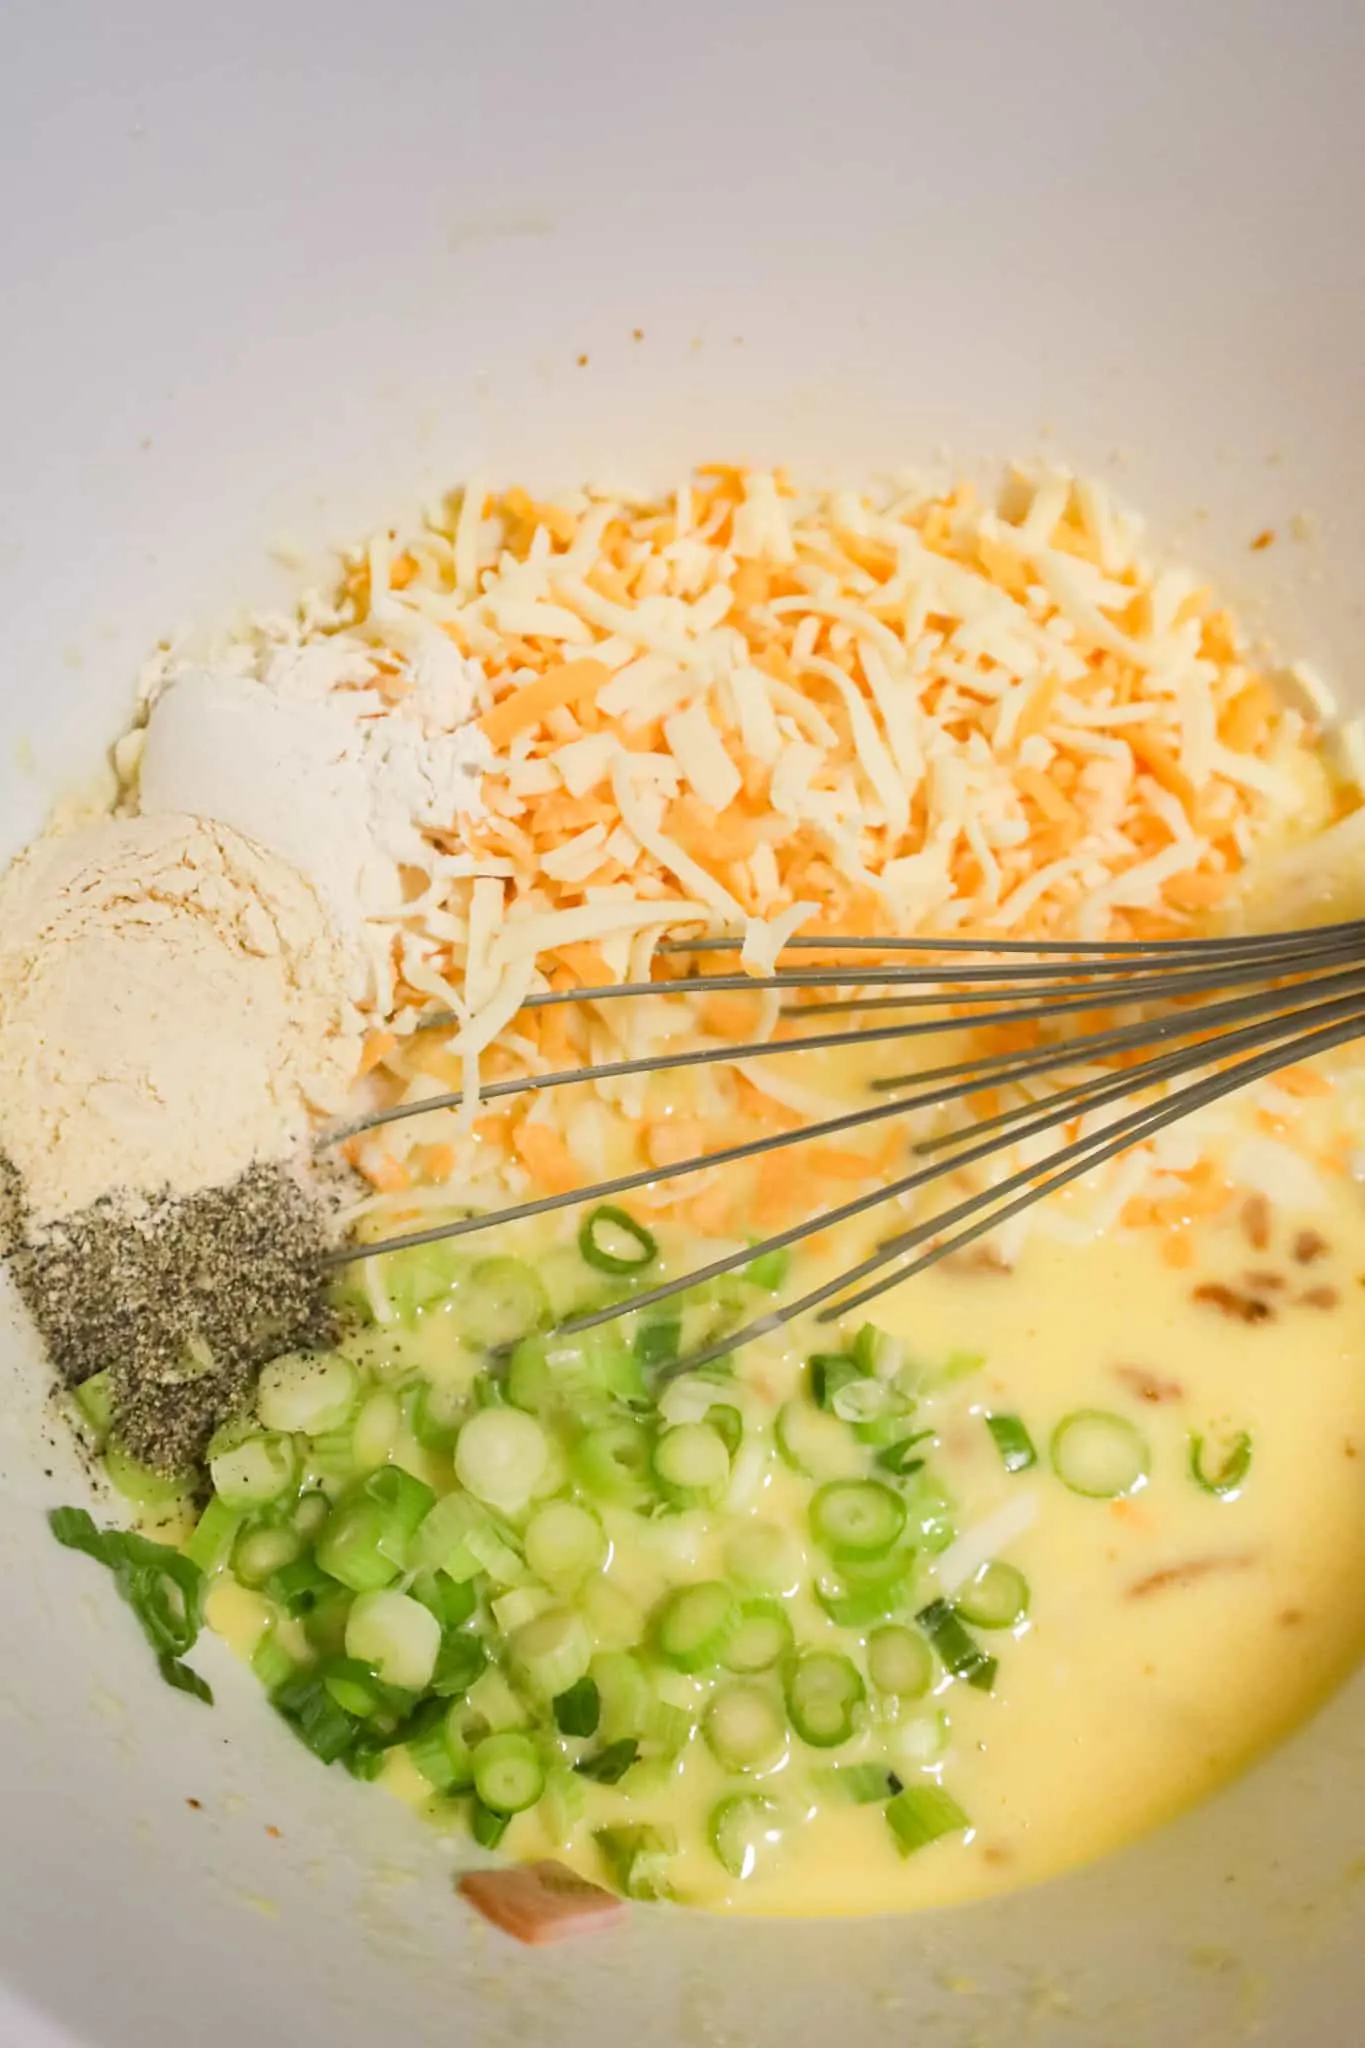 shredded cheese, chopped green onions and spices on top of egg mixture in a mixing bowl